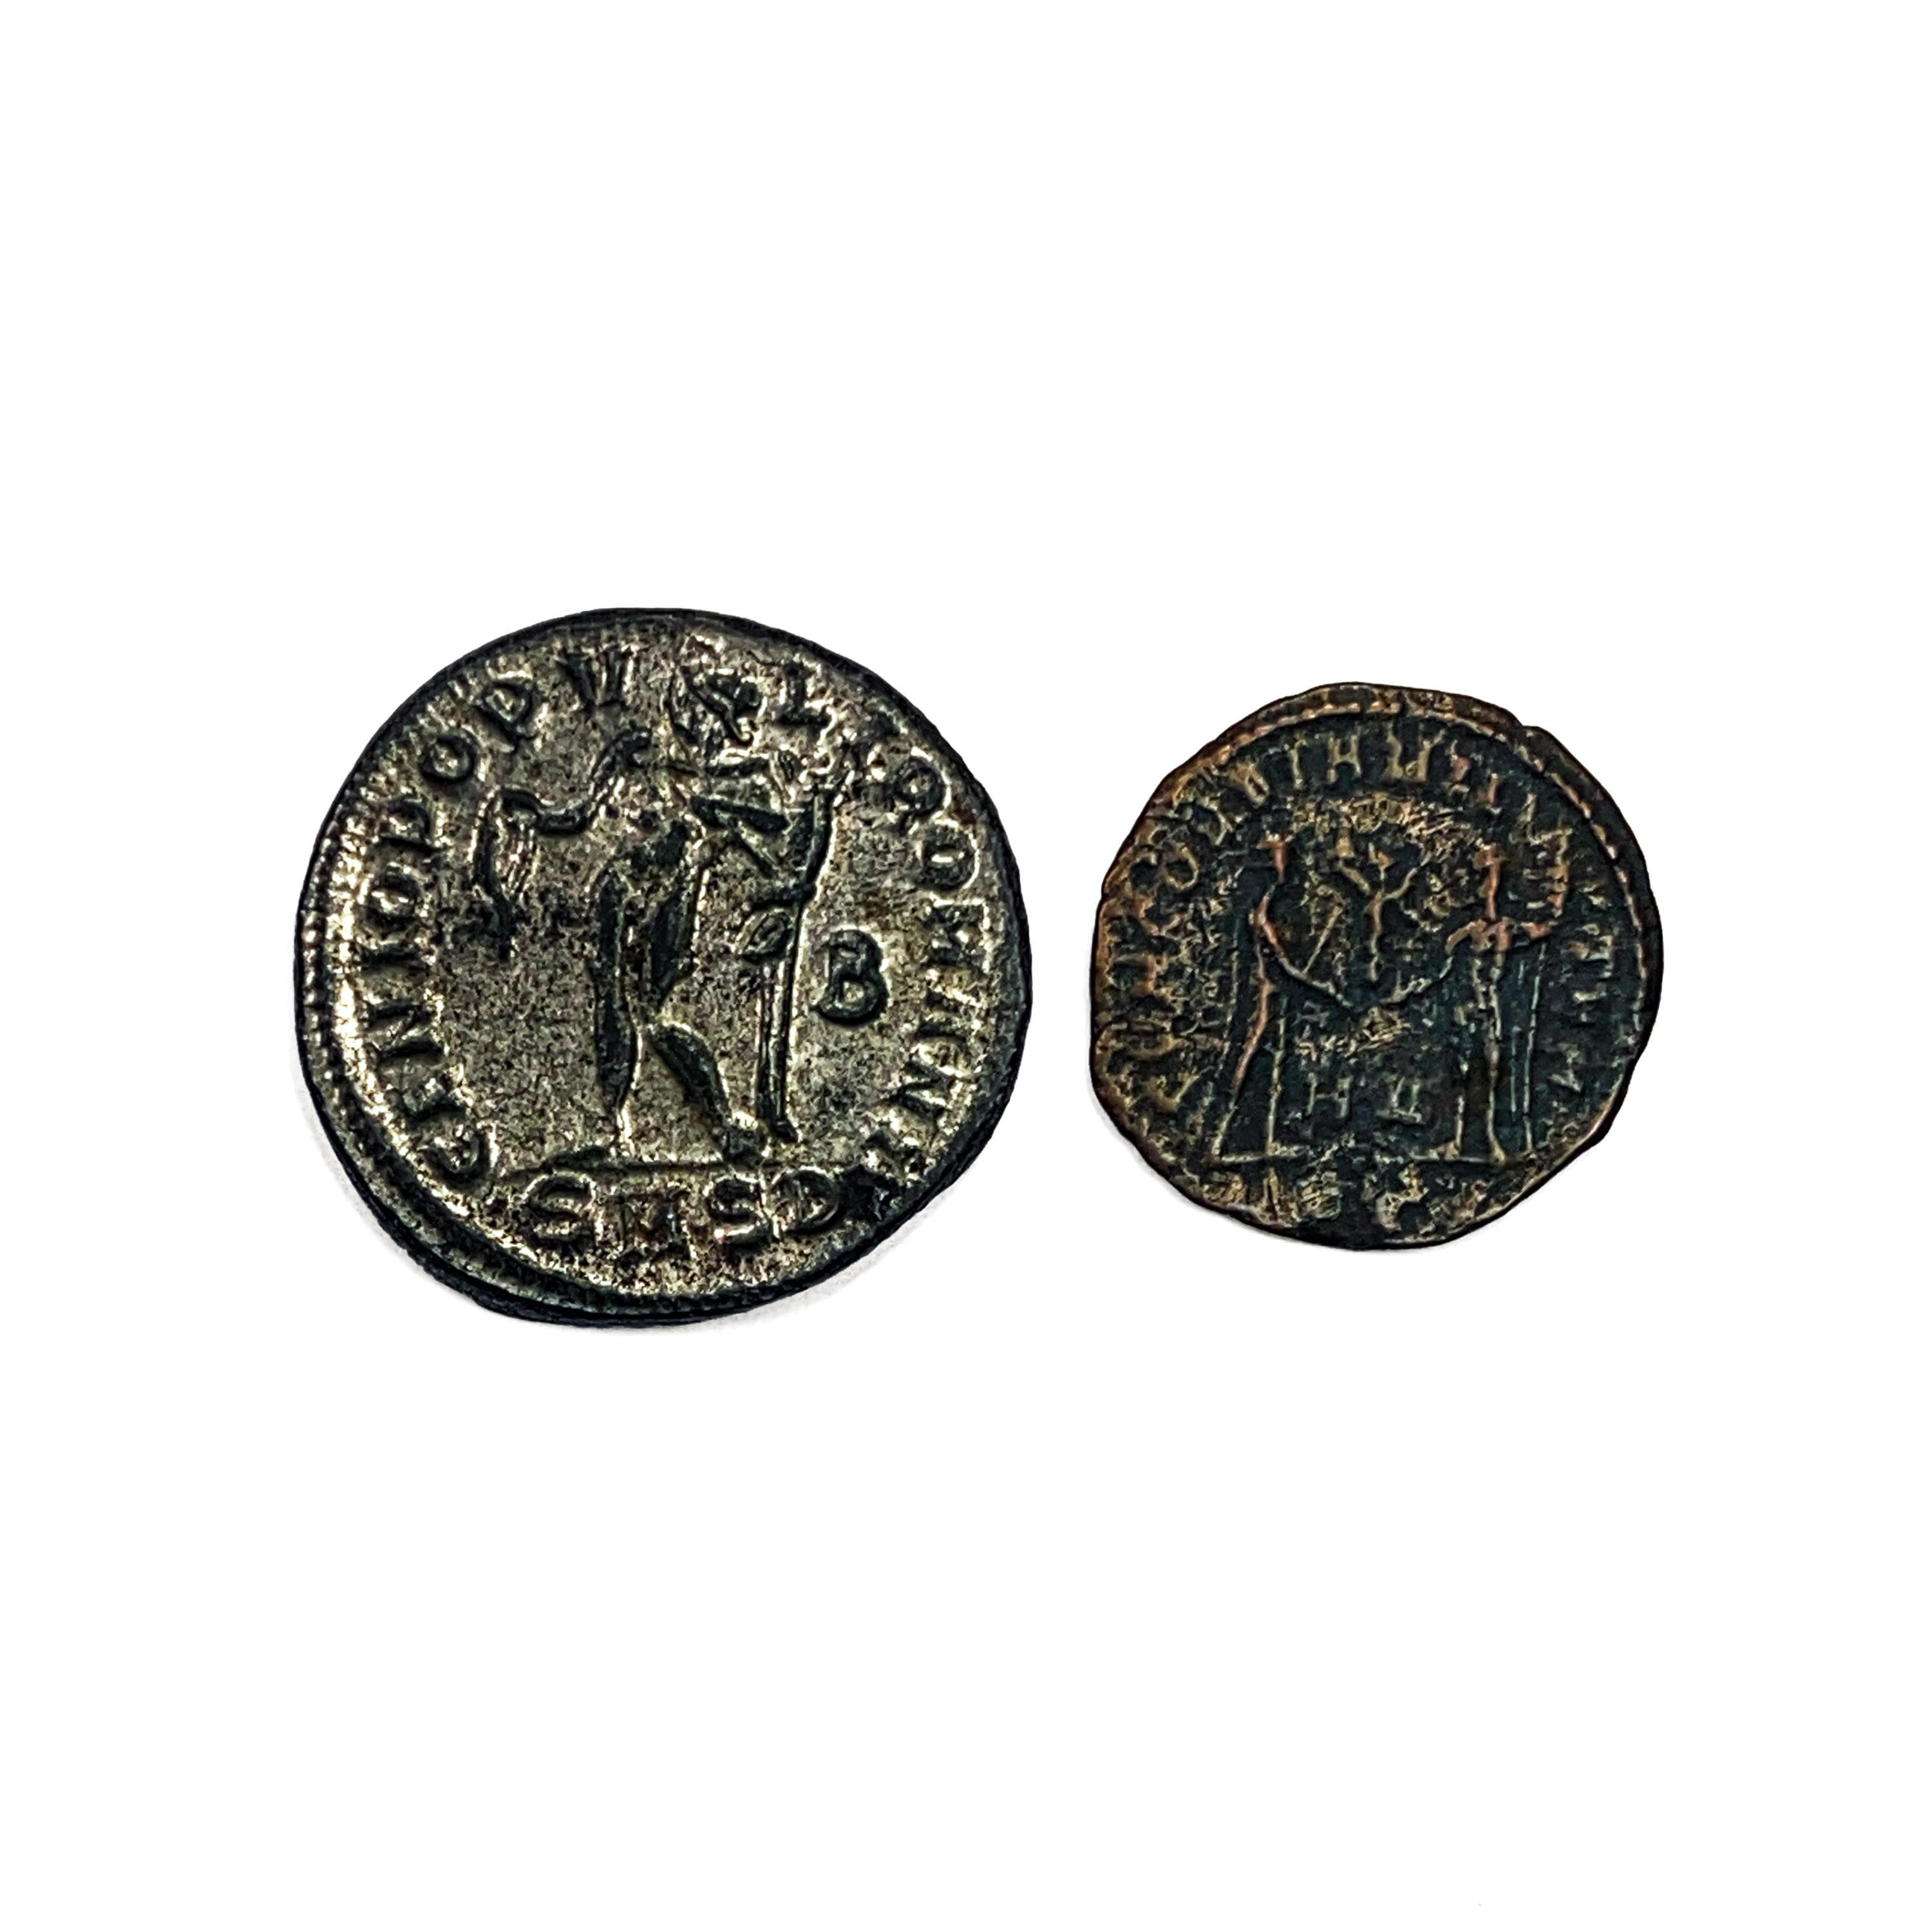 284-305 AD Ancient Roman Bronze Coinage [4 Coins]